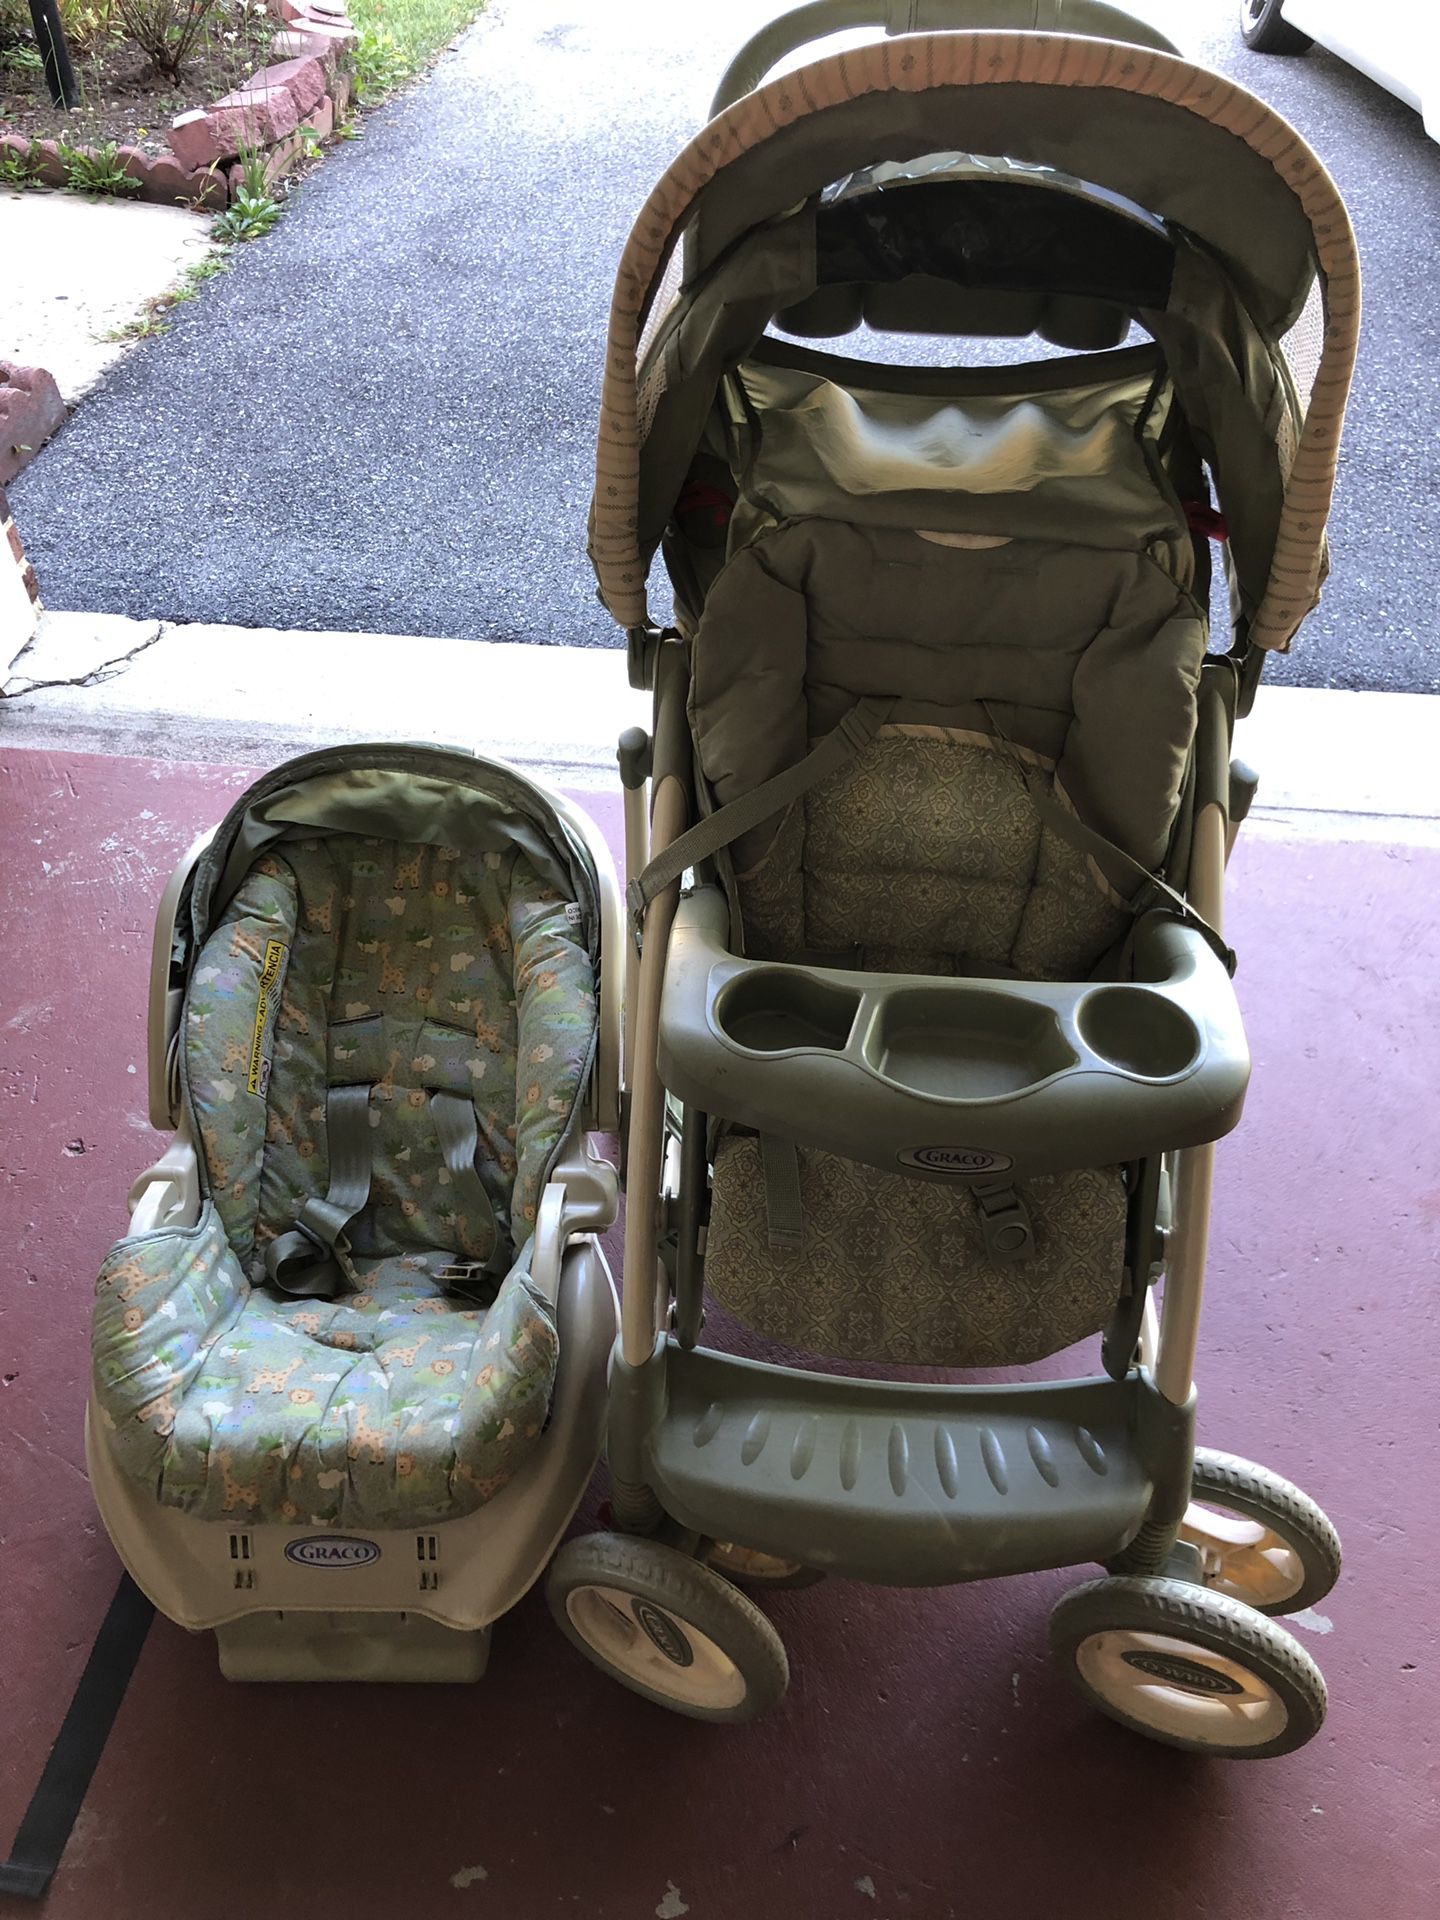 Graco Baby Stroller and Safe Infant Car Seat with Base